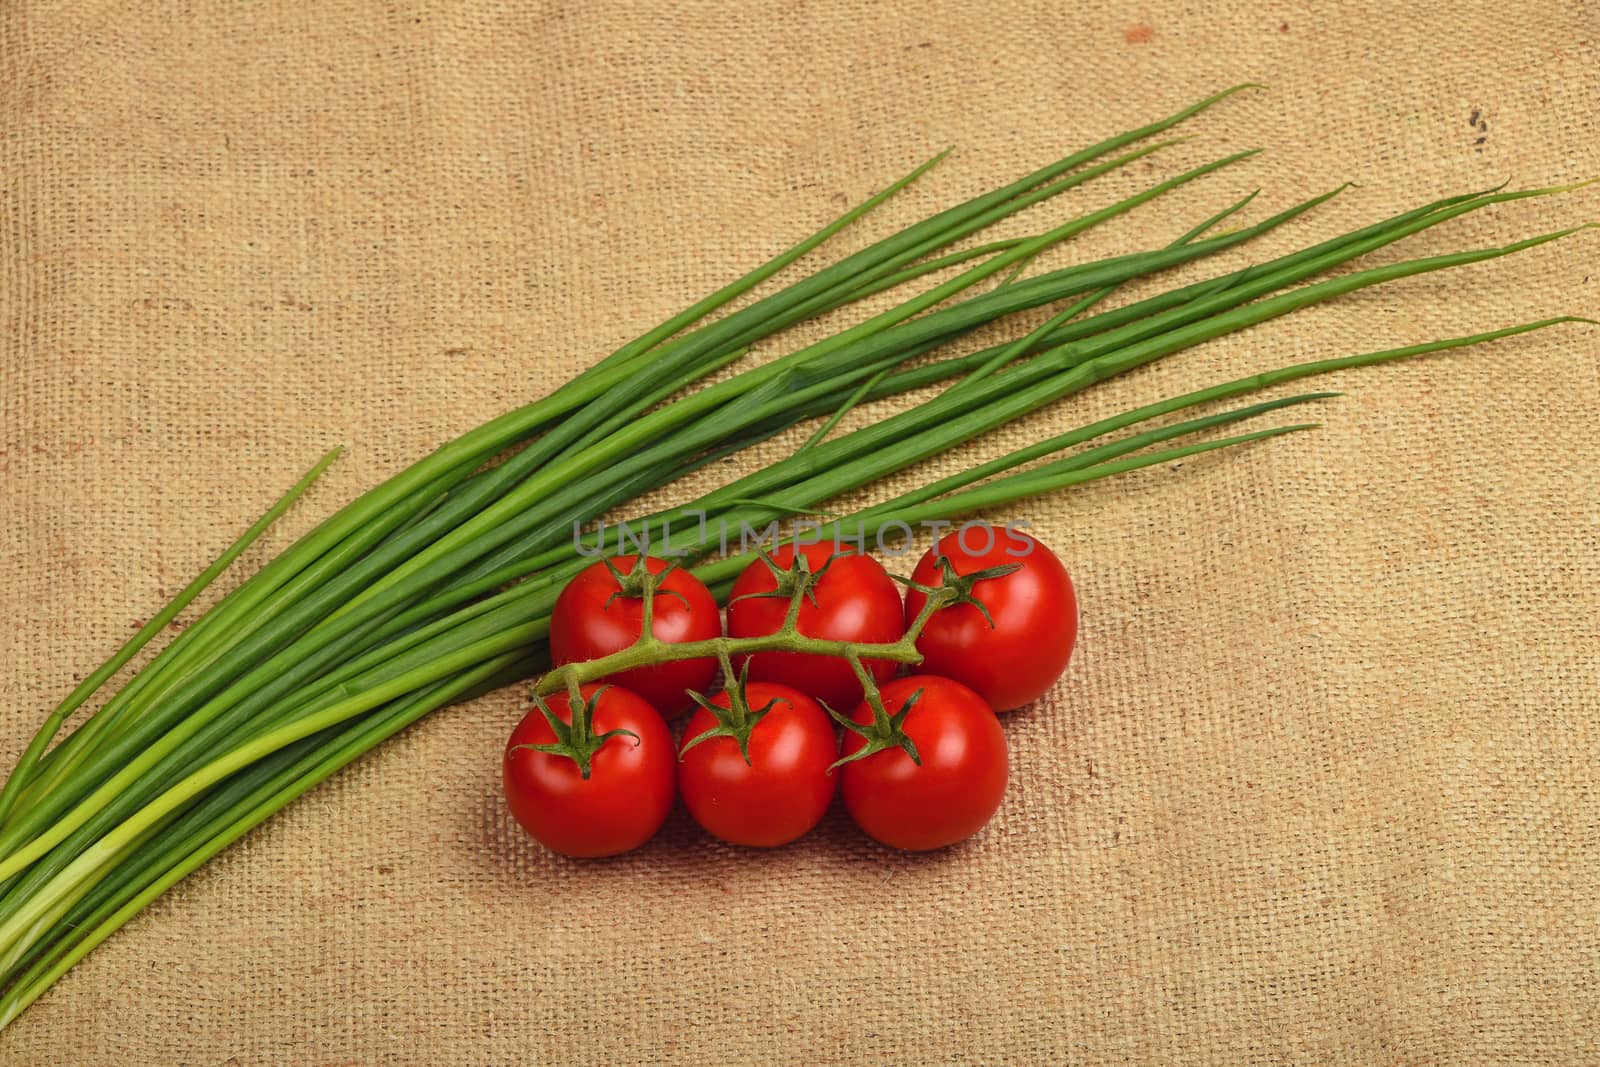 Bunch of six red ripe cherry tomato and fresh spring bunching onion shots at jute canvas burlap background